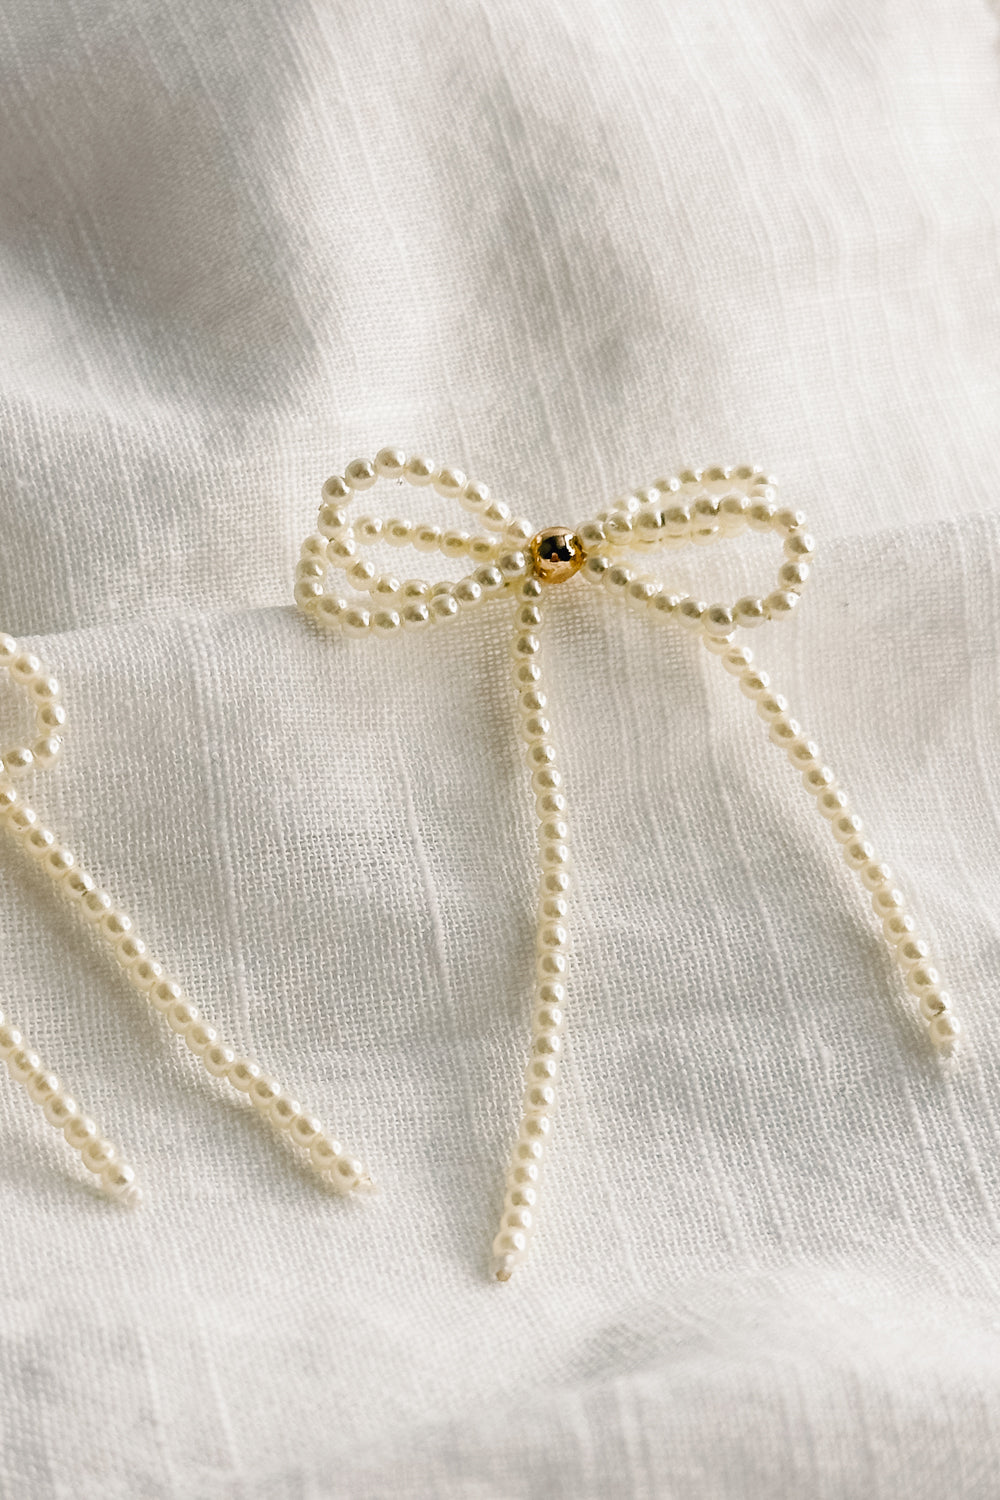 Close up view of the Tarah Cream Pearl Bow Dangle Earrings which features mini cream pearls, single gold pearl detail and shaped as a bow